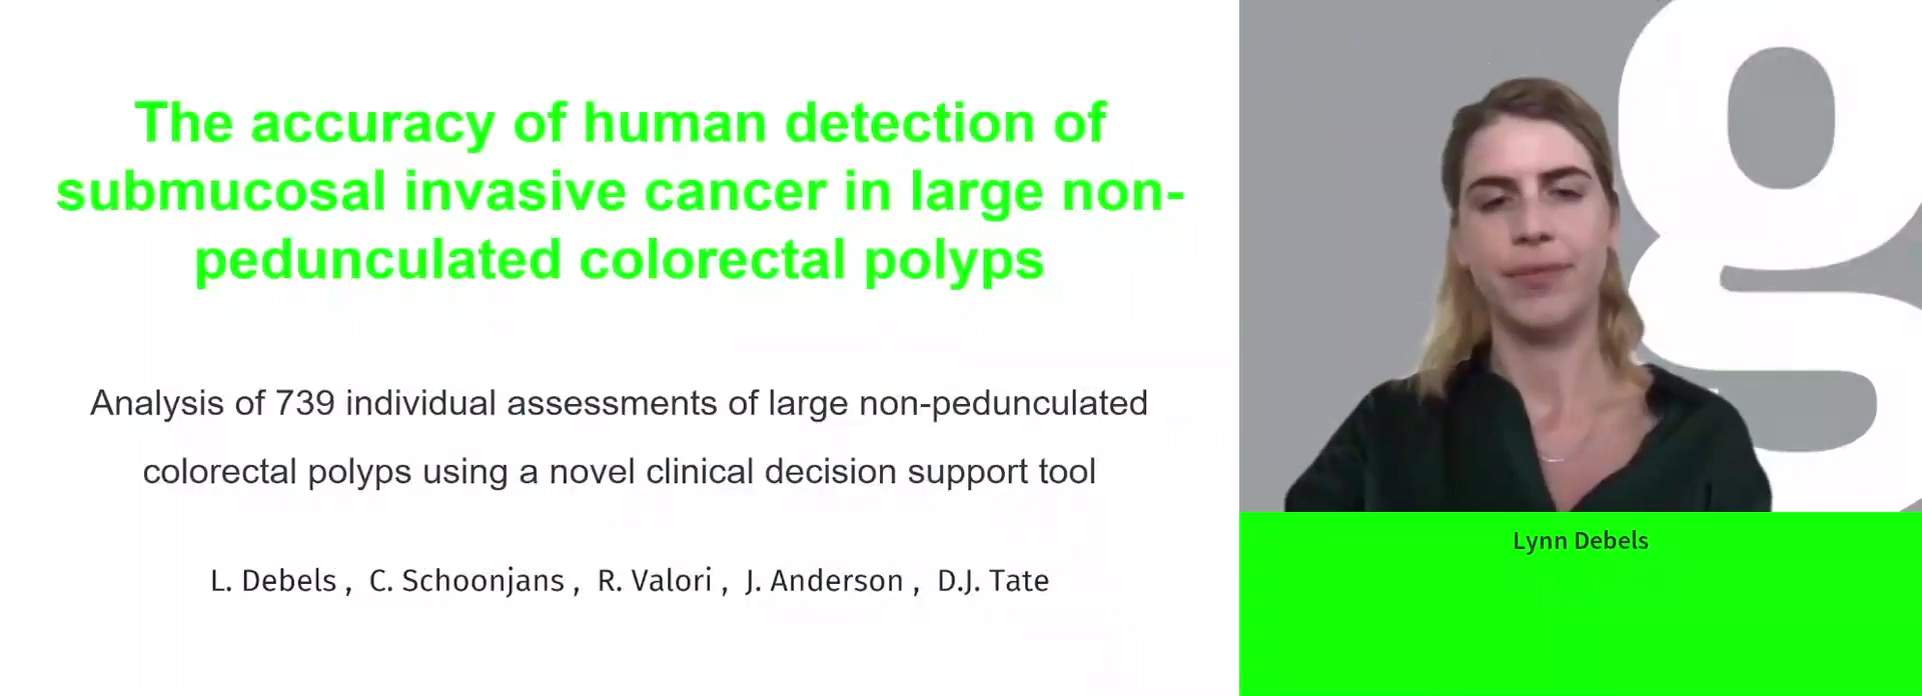 THE ACCURACY OF HUMAN DETECTION OF SUBMUCOSAL INVASIVE CANCER– ANALYSIS OF 739 INDIVIDUAL ASSESSMENTS OF LARGE NON-PEDUNCULATED COLORECTAL POLYPS (LNPCPS) USING A NOVEL CLINICAL DECISION SUPPORT TOOL